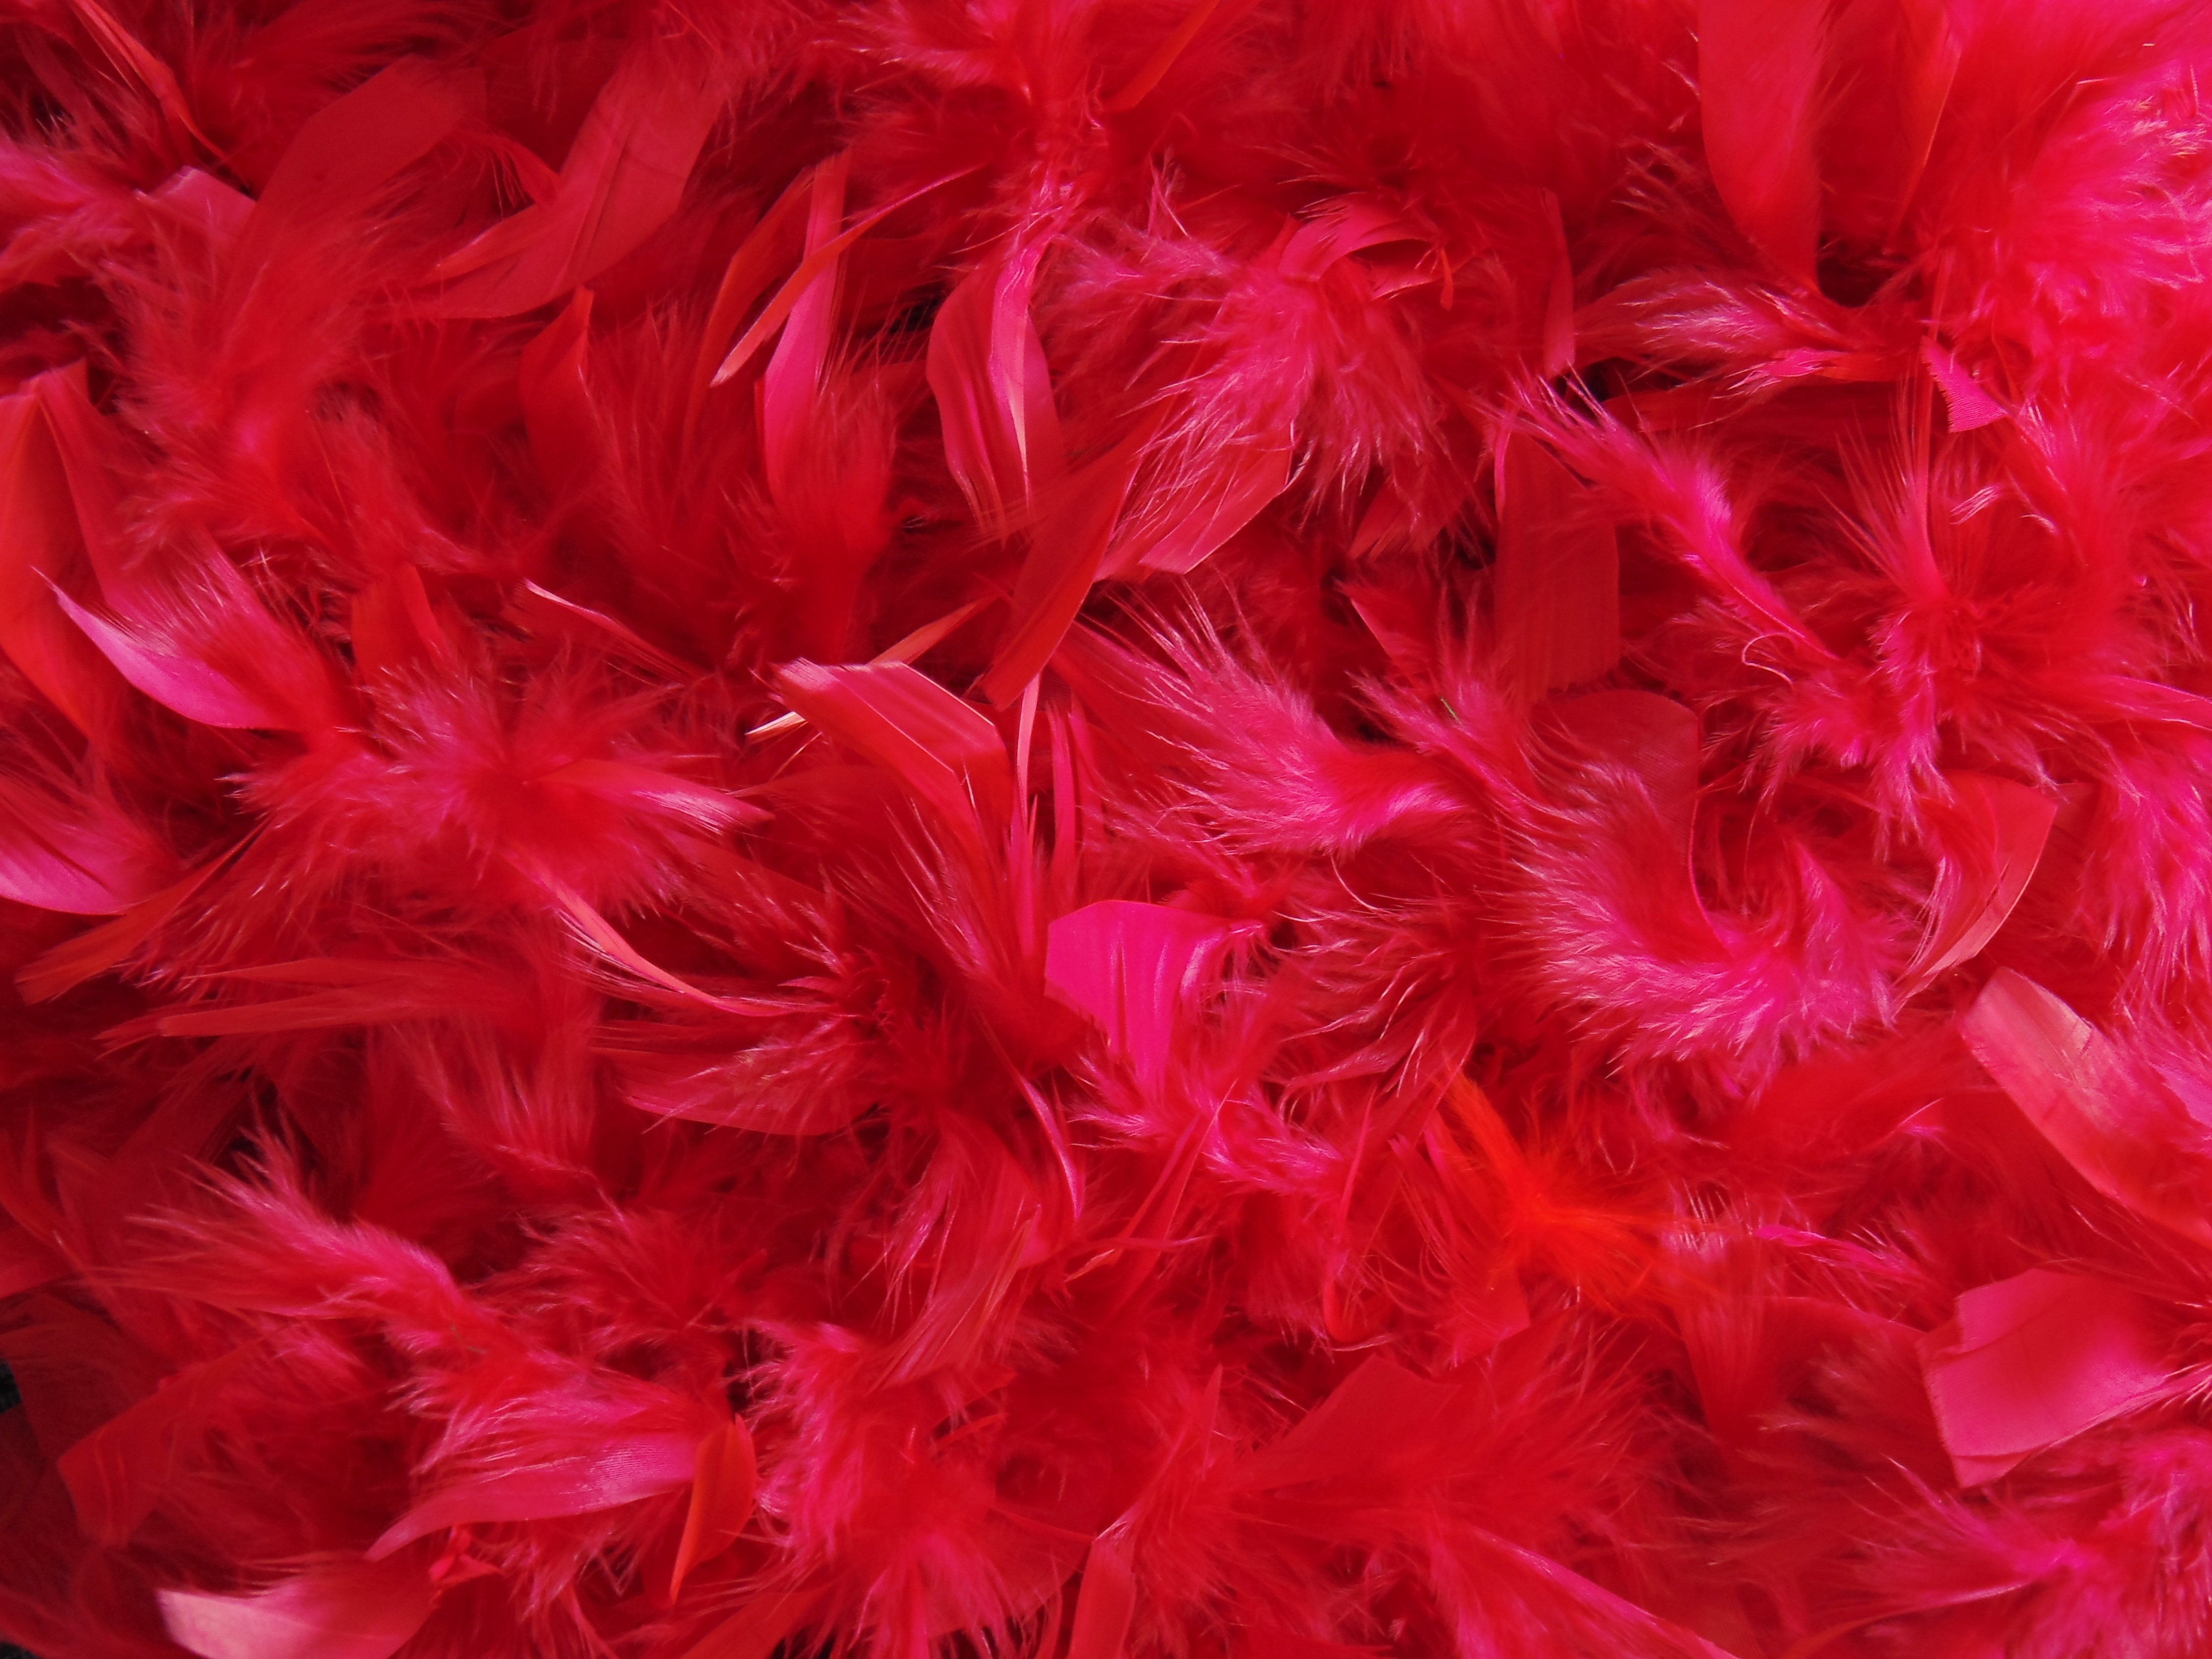 138857 download wallpaper feather, red, miscellanea, miscellaneous, fluff, fuzz screensavers and pictures for free